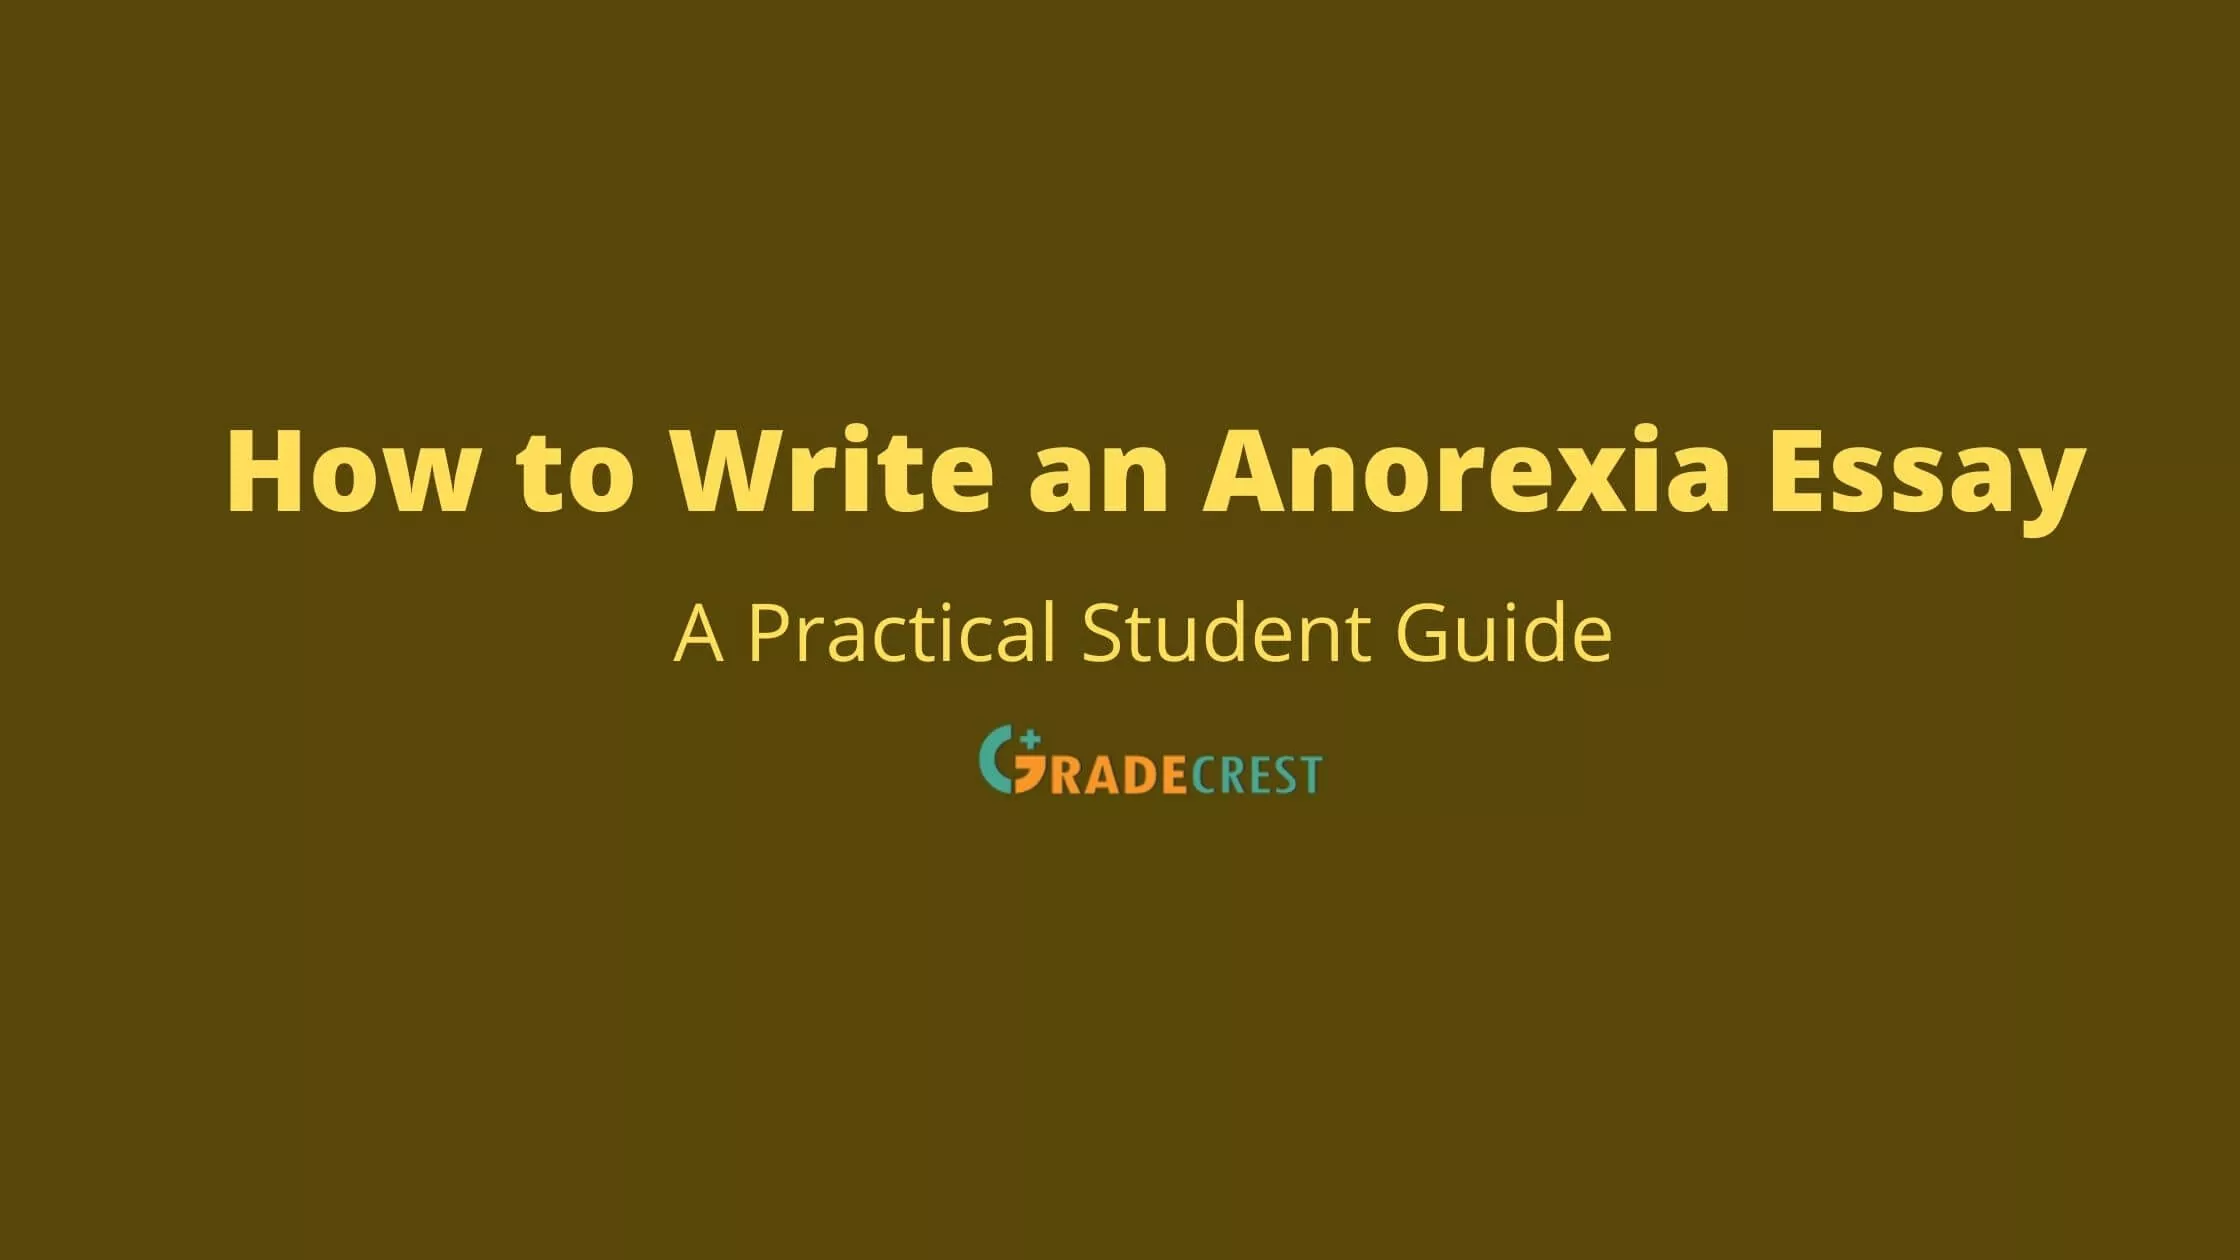 Anorexia essay guide for beginners